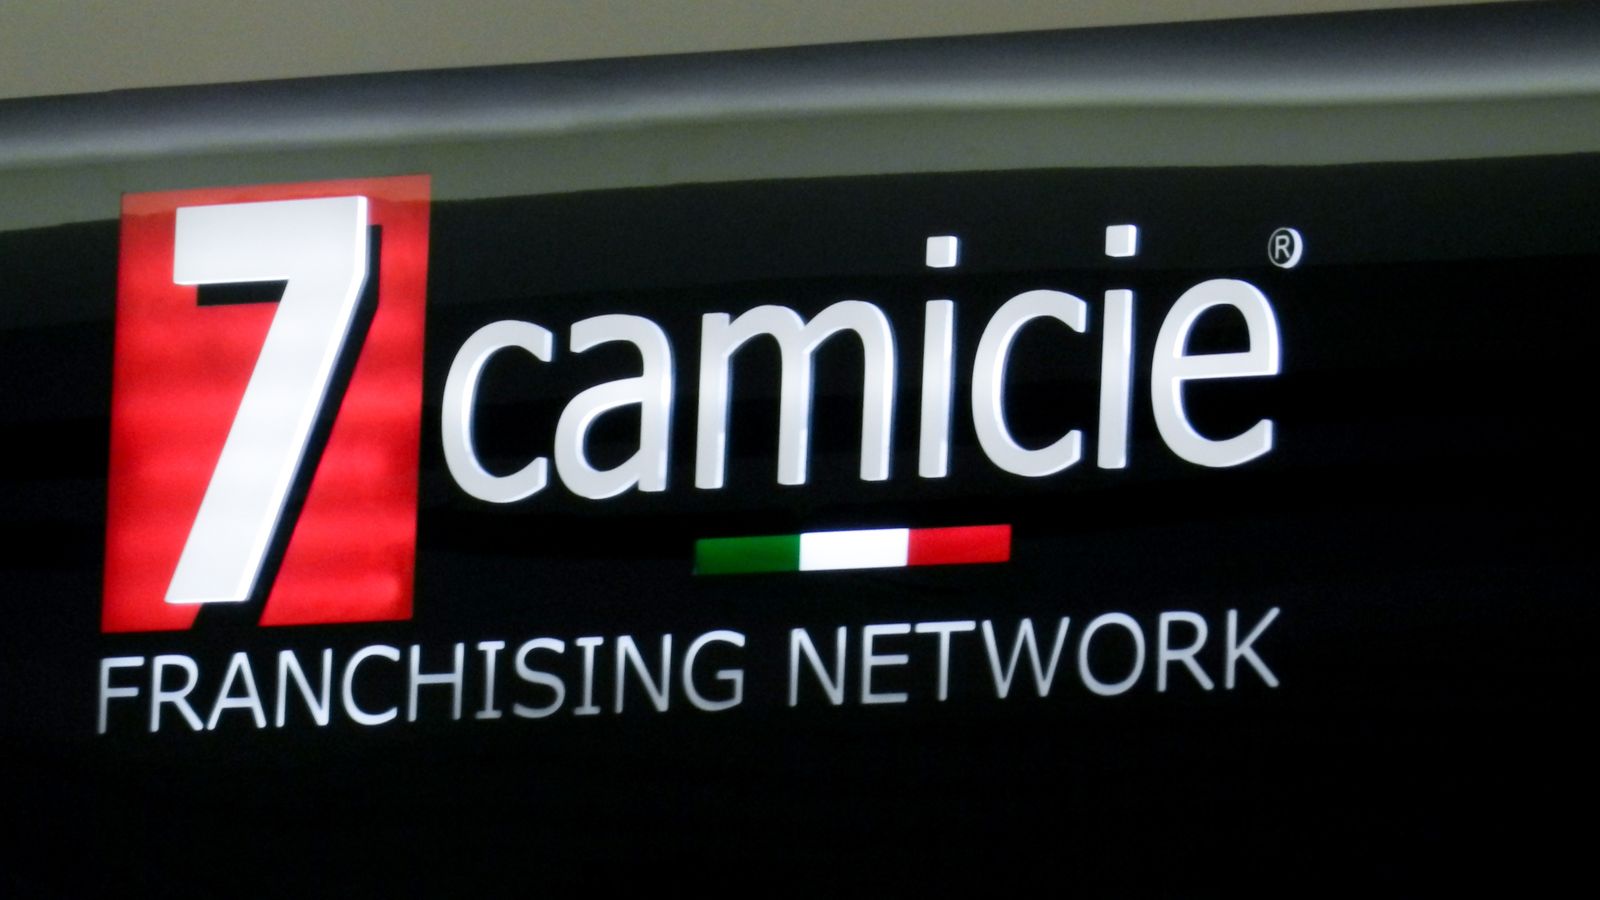 7 camicie franchising network 3d letters